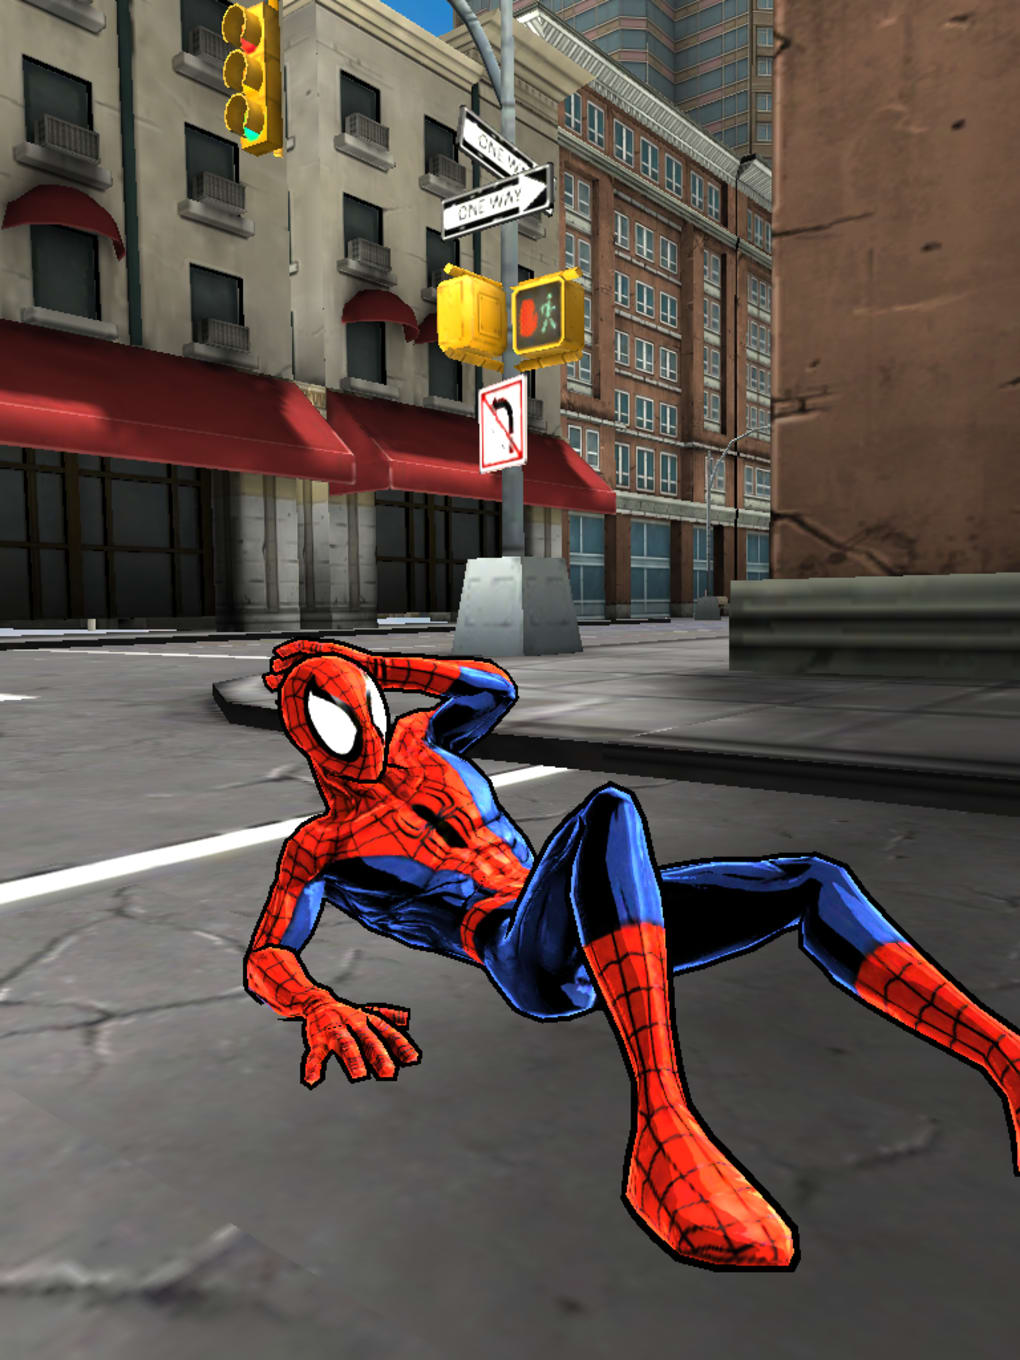 Review e Gameplay: Spider man Unlimited iOS/Android [PT-BR] 